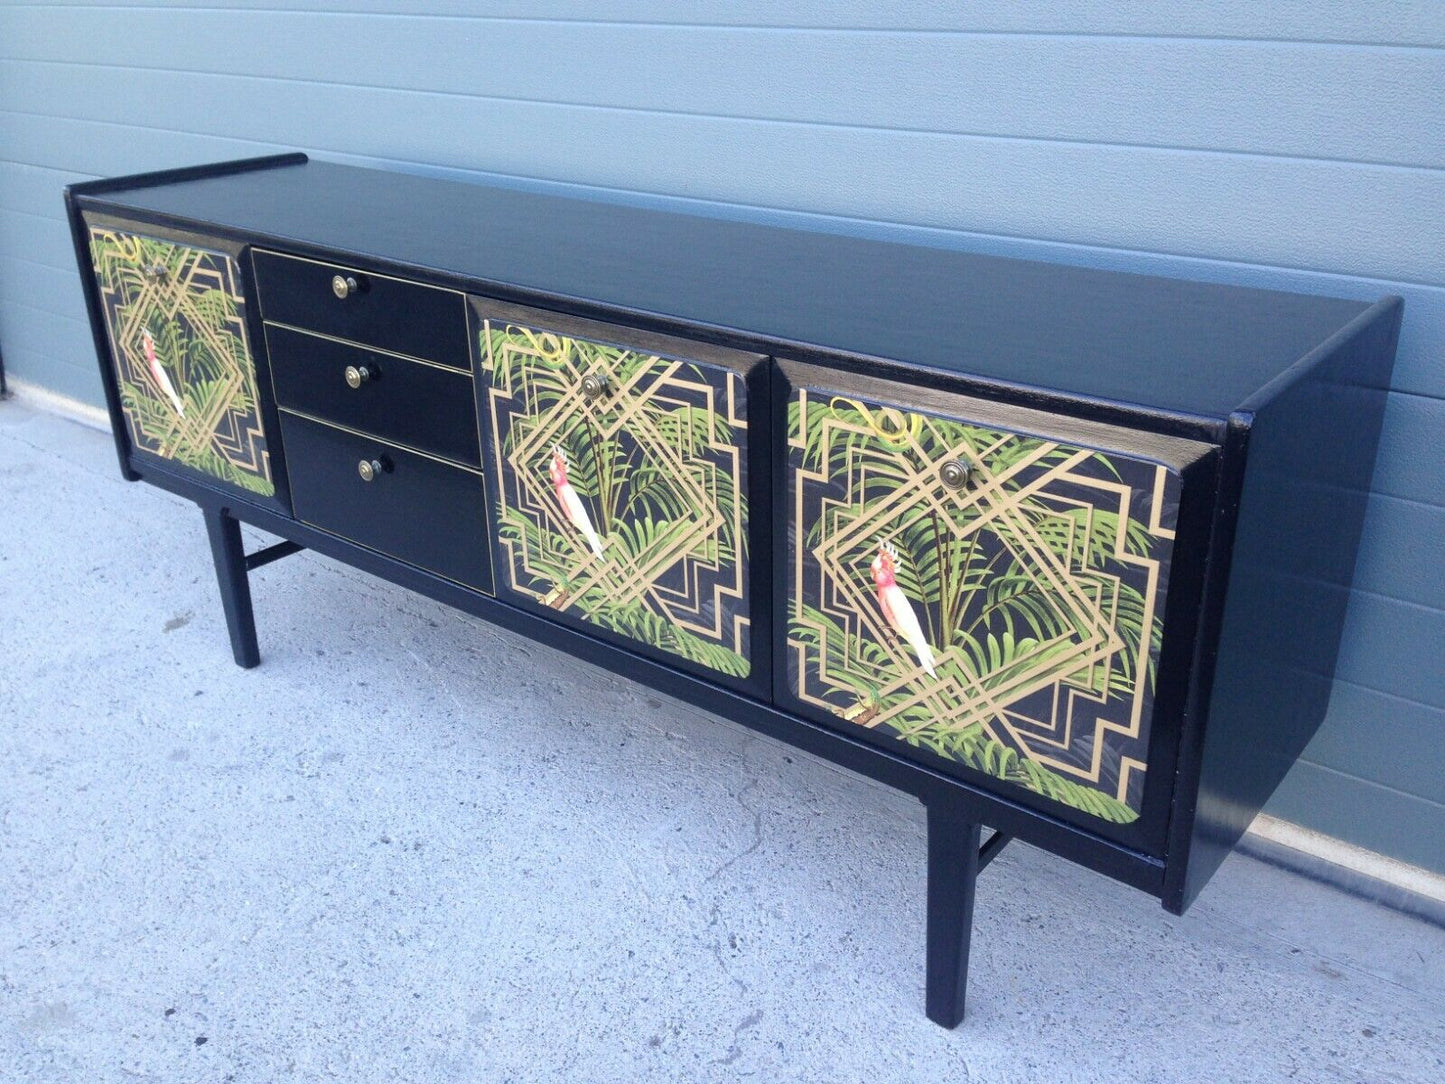 232.....Stunning Retro Sideboard Refinished In Black And Decoupage Decoration ( SOLD  )